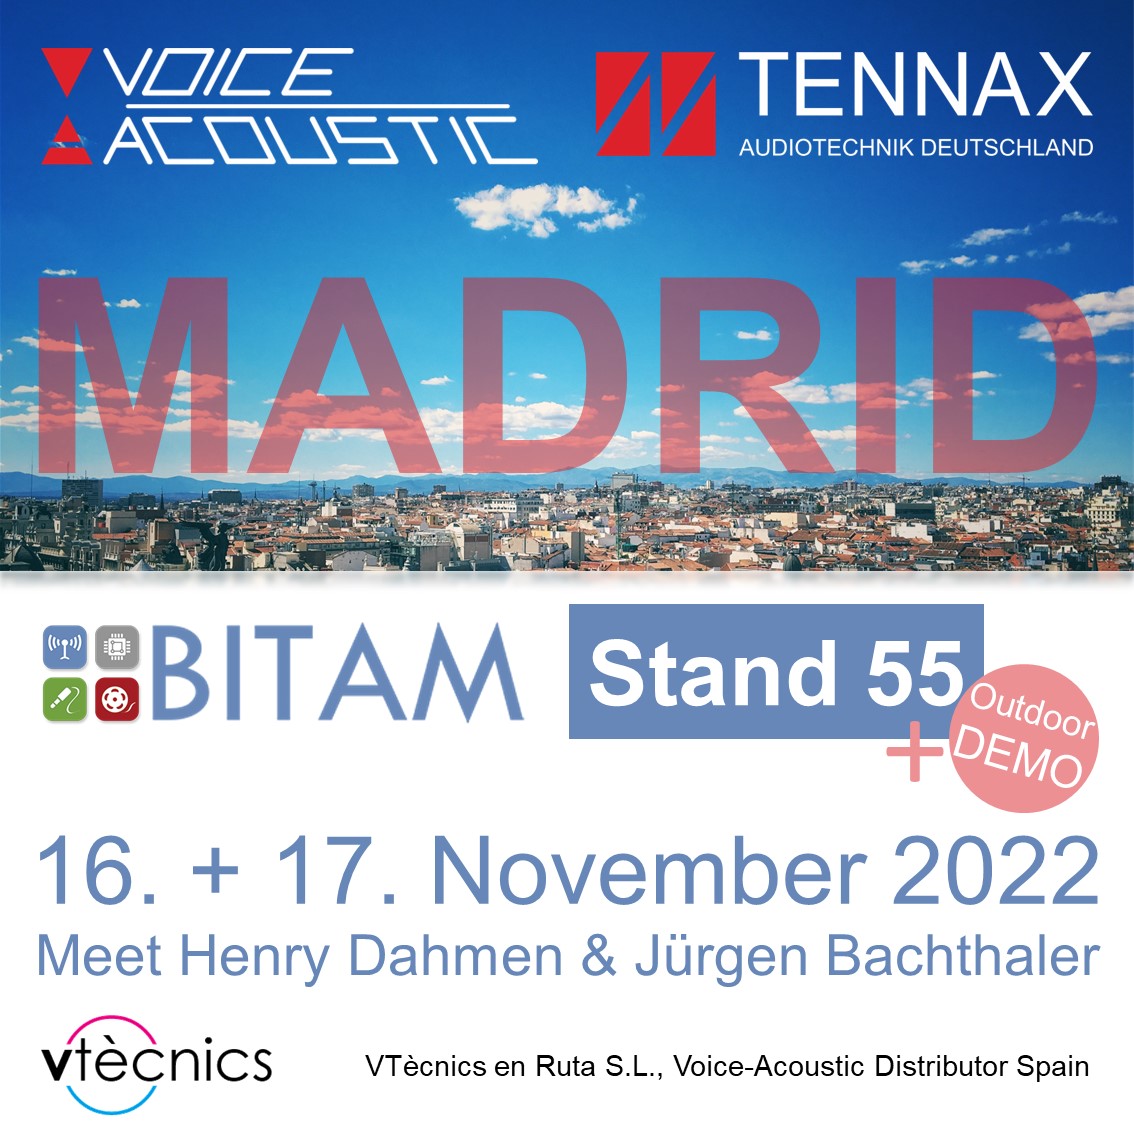 Voice-Acoustic and TENNAX at the BITAM Show 2022